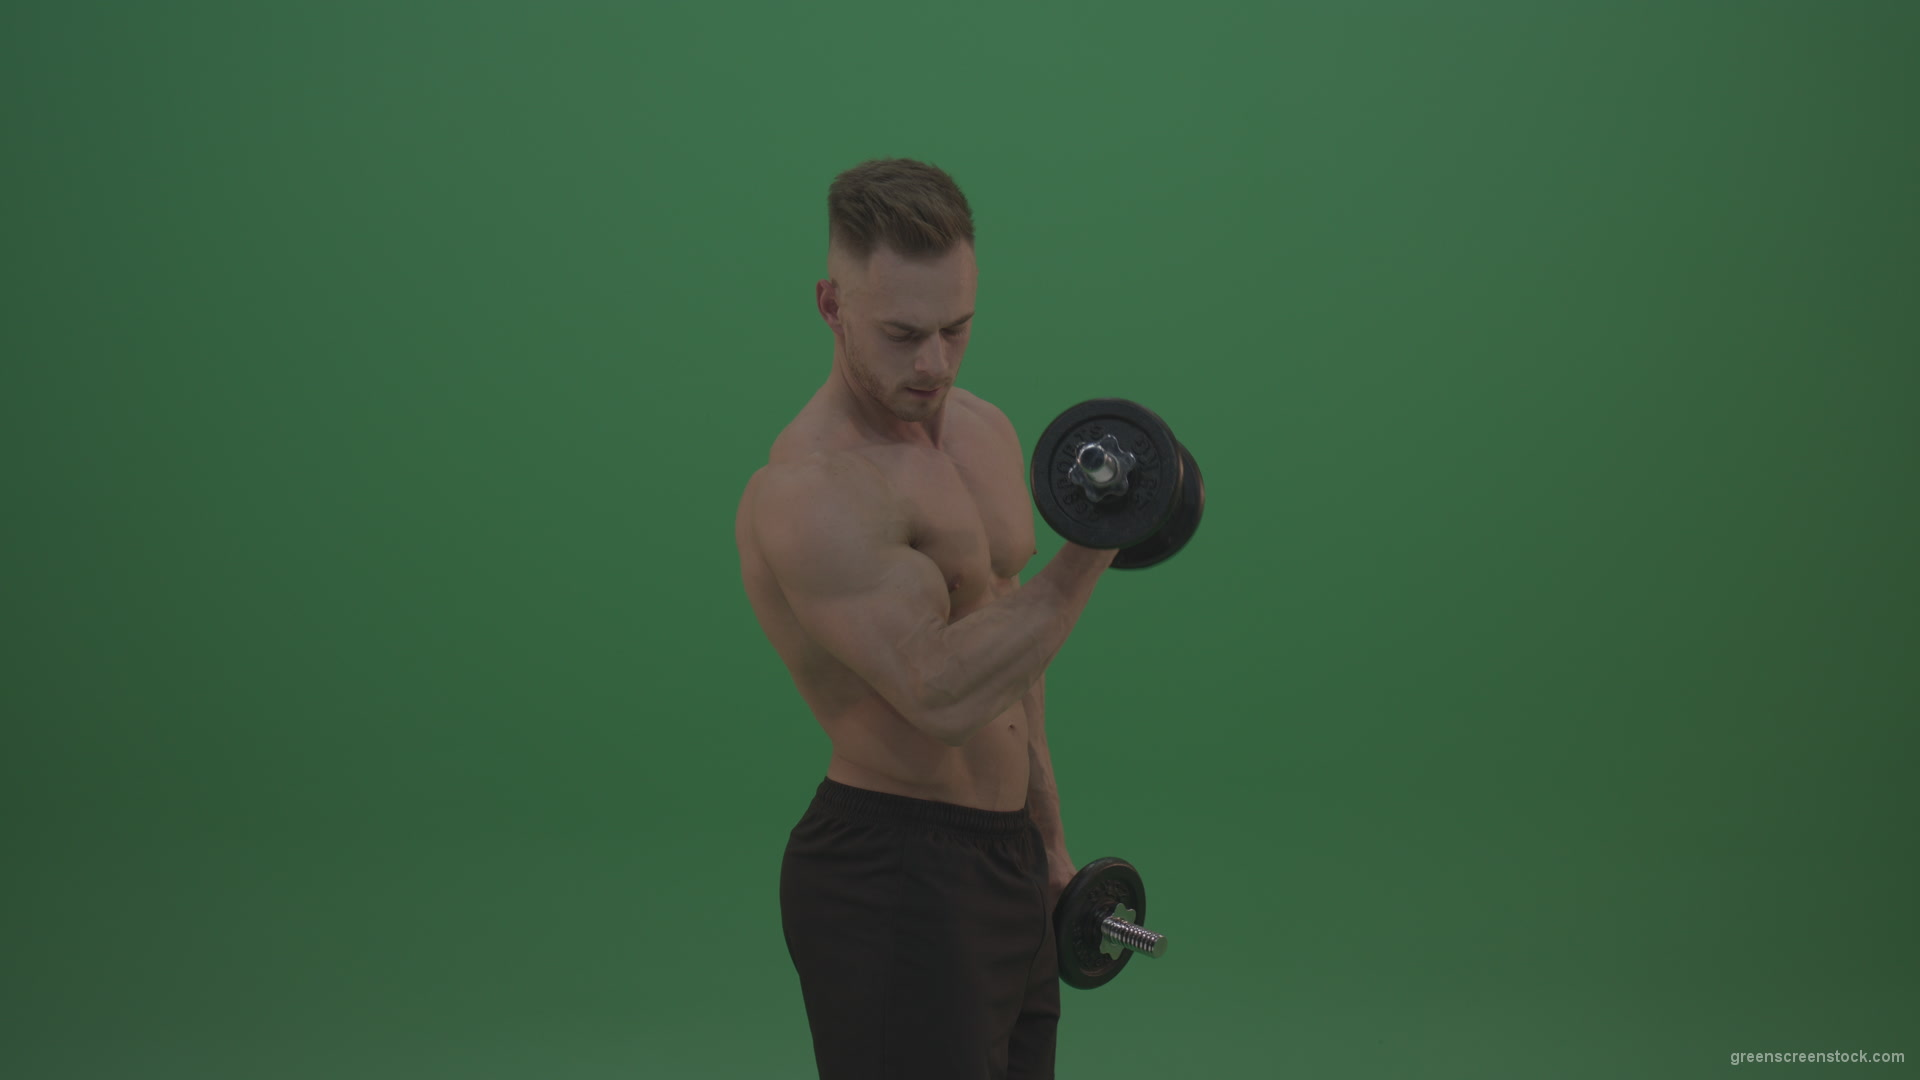 Young_Bodybuilder_Working_Out_Two_Handed_Dumbbell_Push_Ups_Excercise_On_Green_Screen_Wall_Background_002 Green Screen Stock